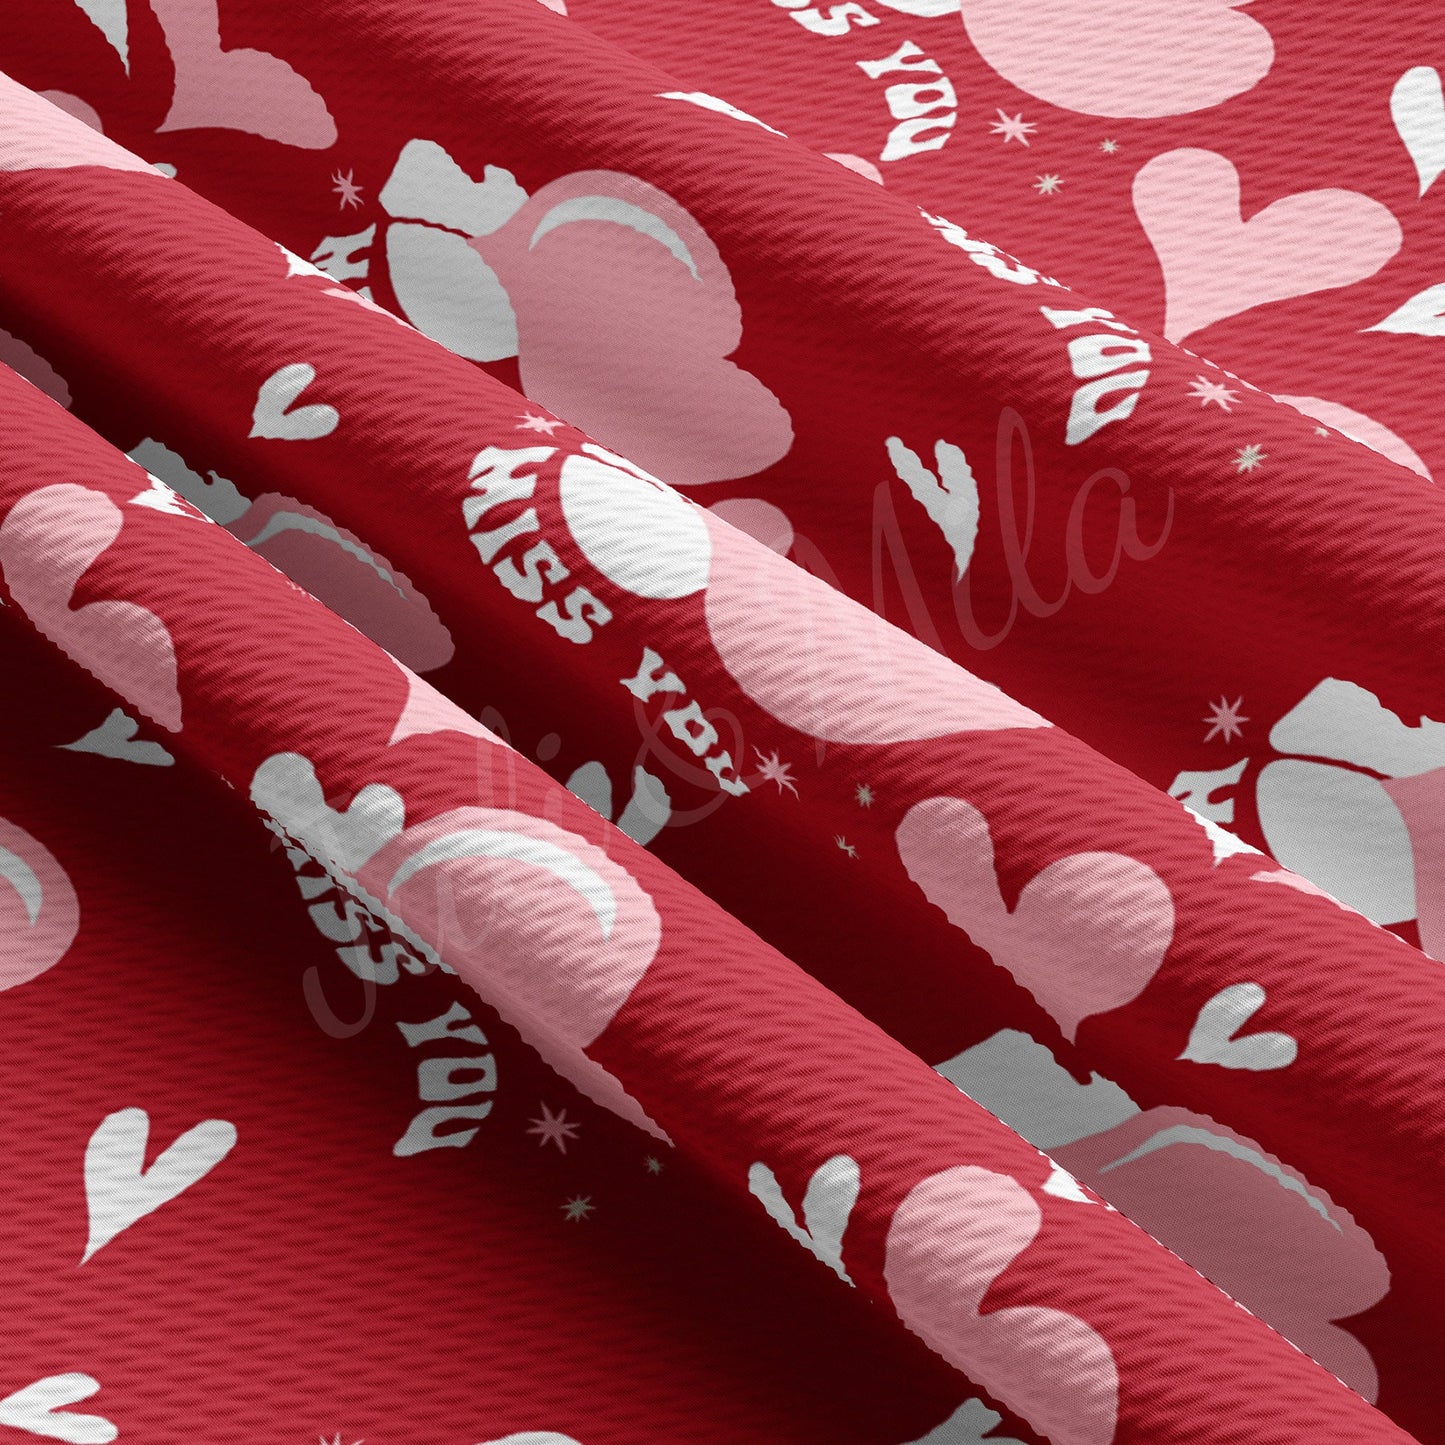 Valentines Day Bullet Textured Fabric  AA1332